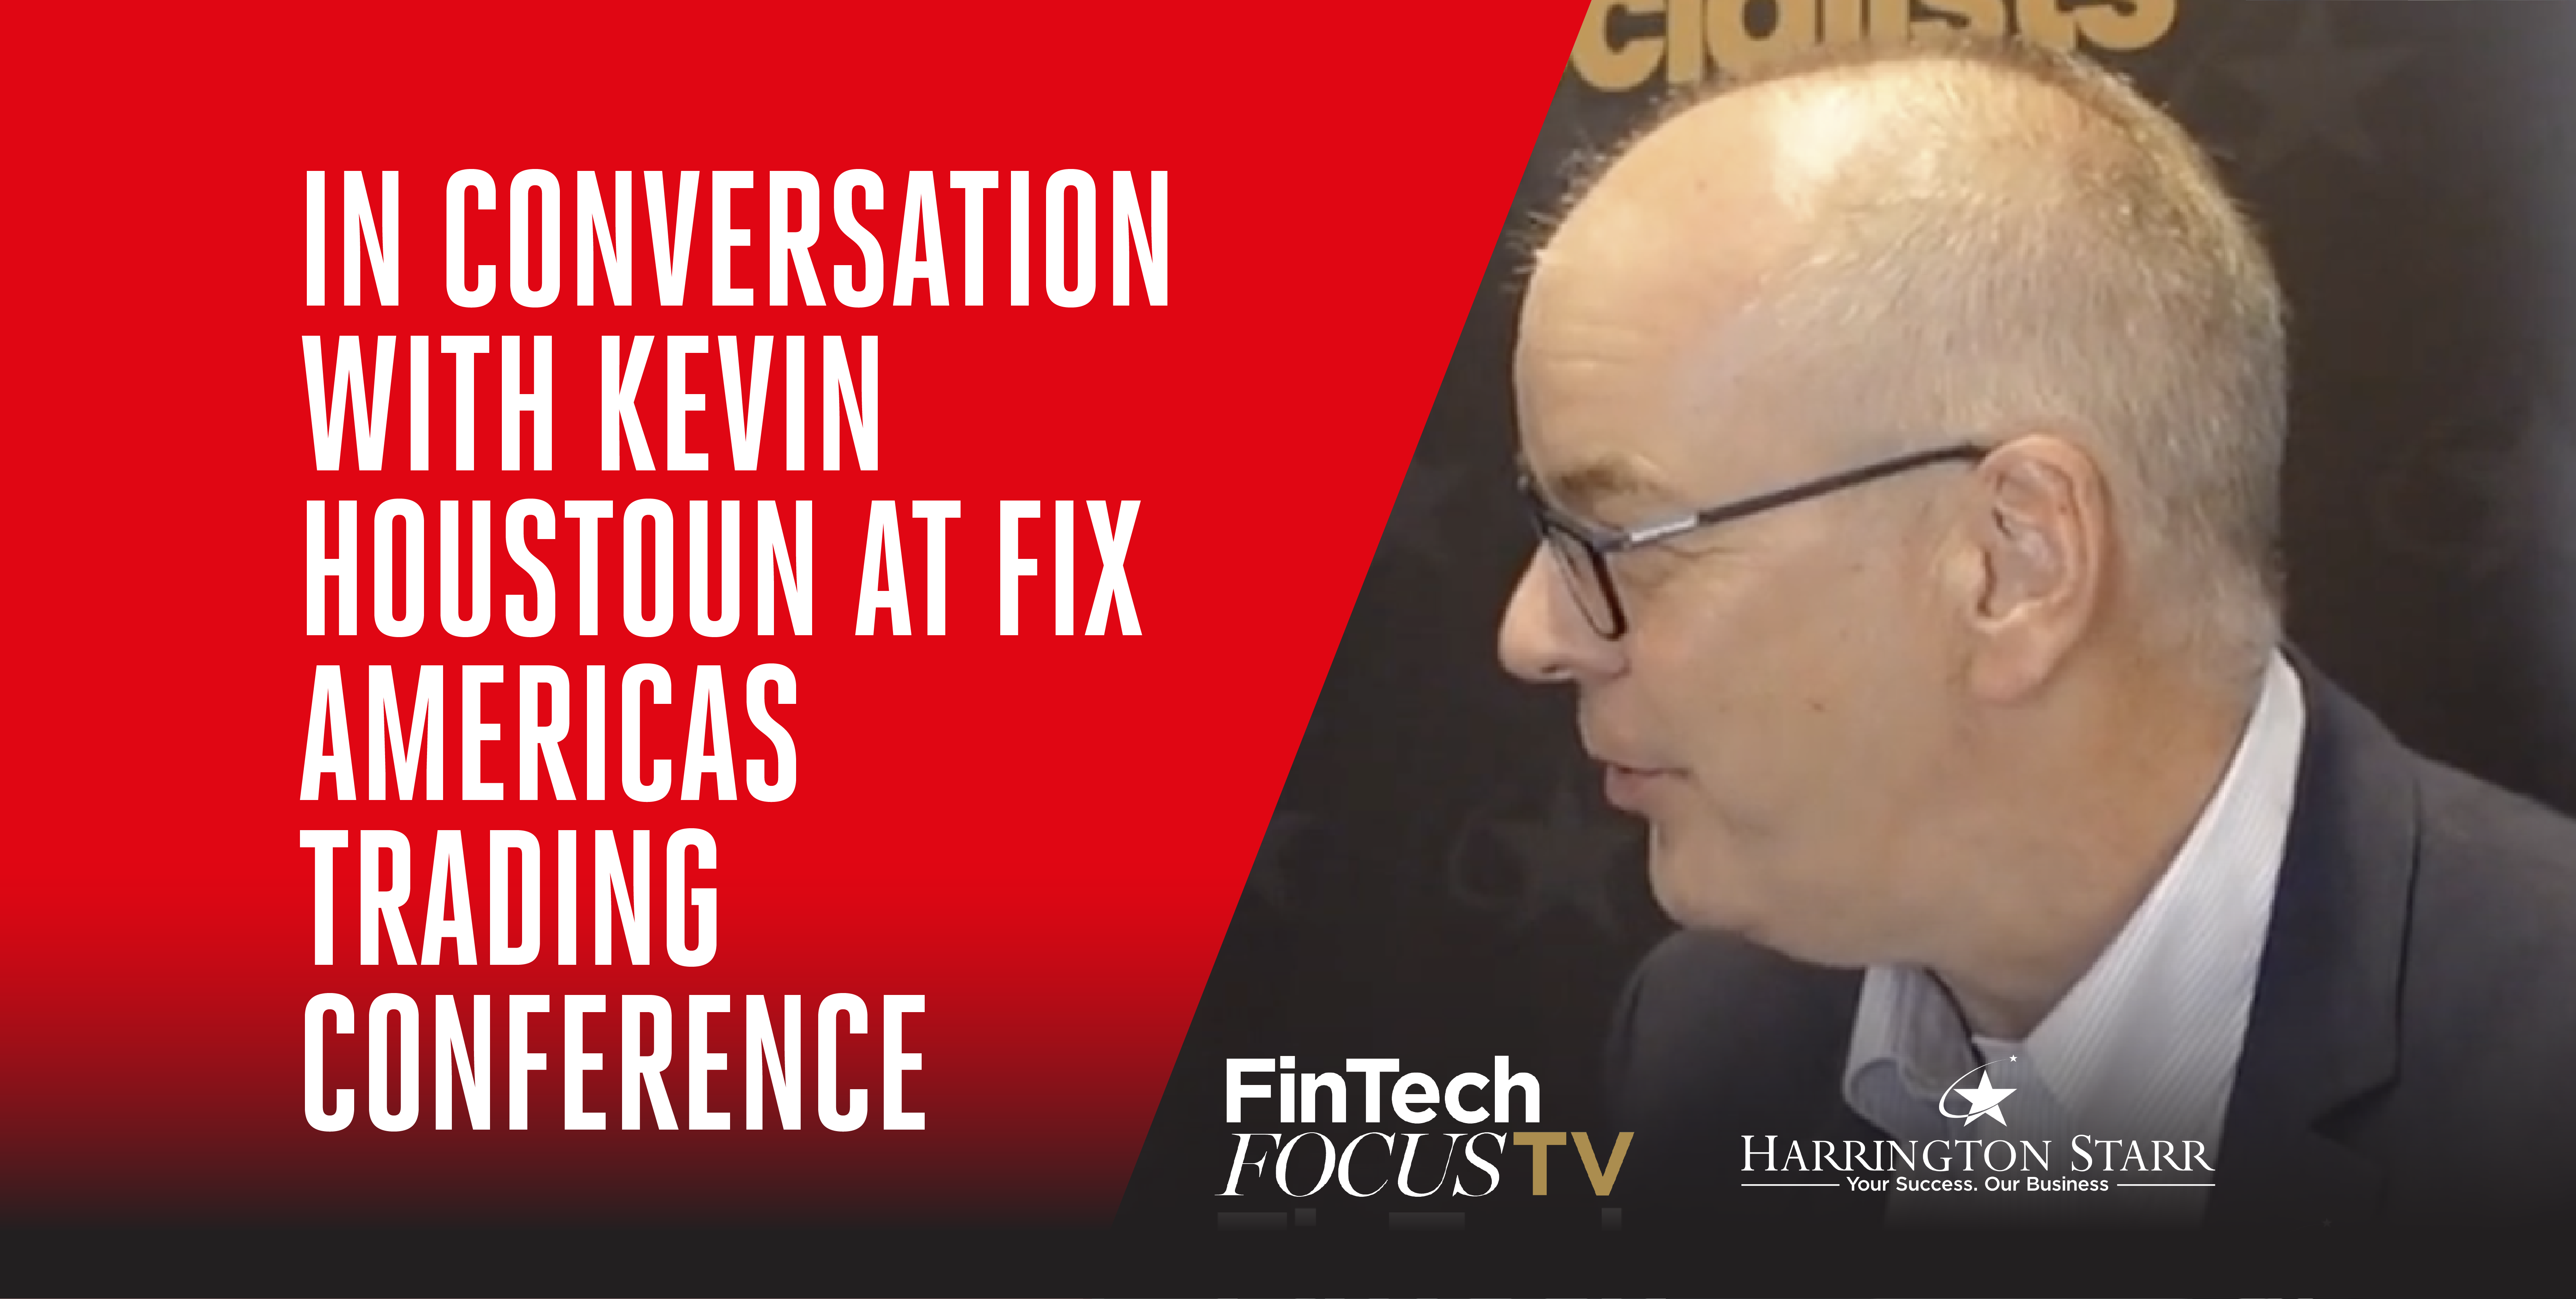 In Conversation with Kevin Houstoun at FIX Americas Trading Conference